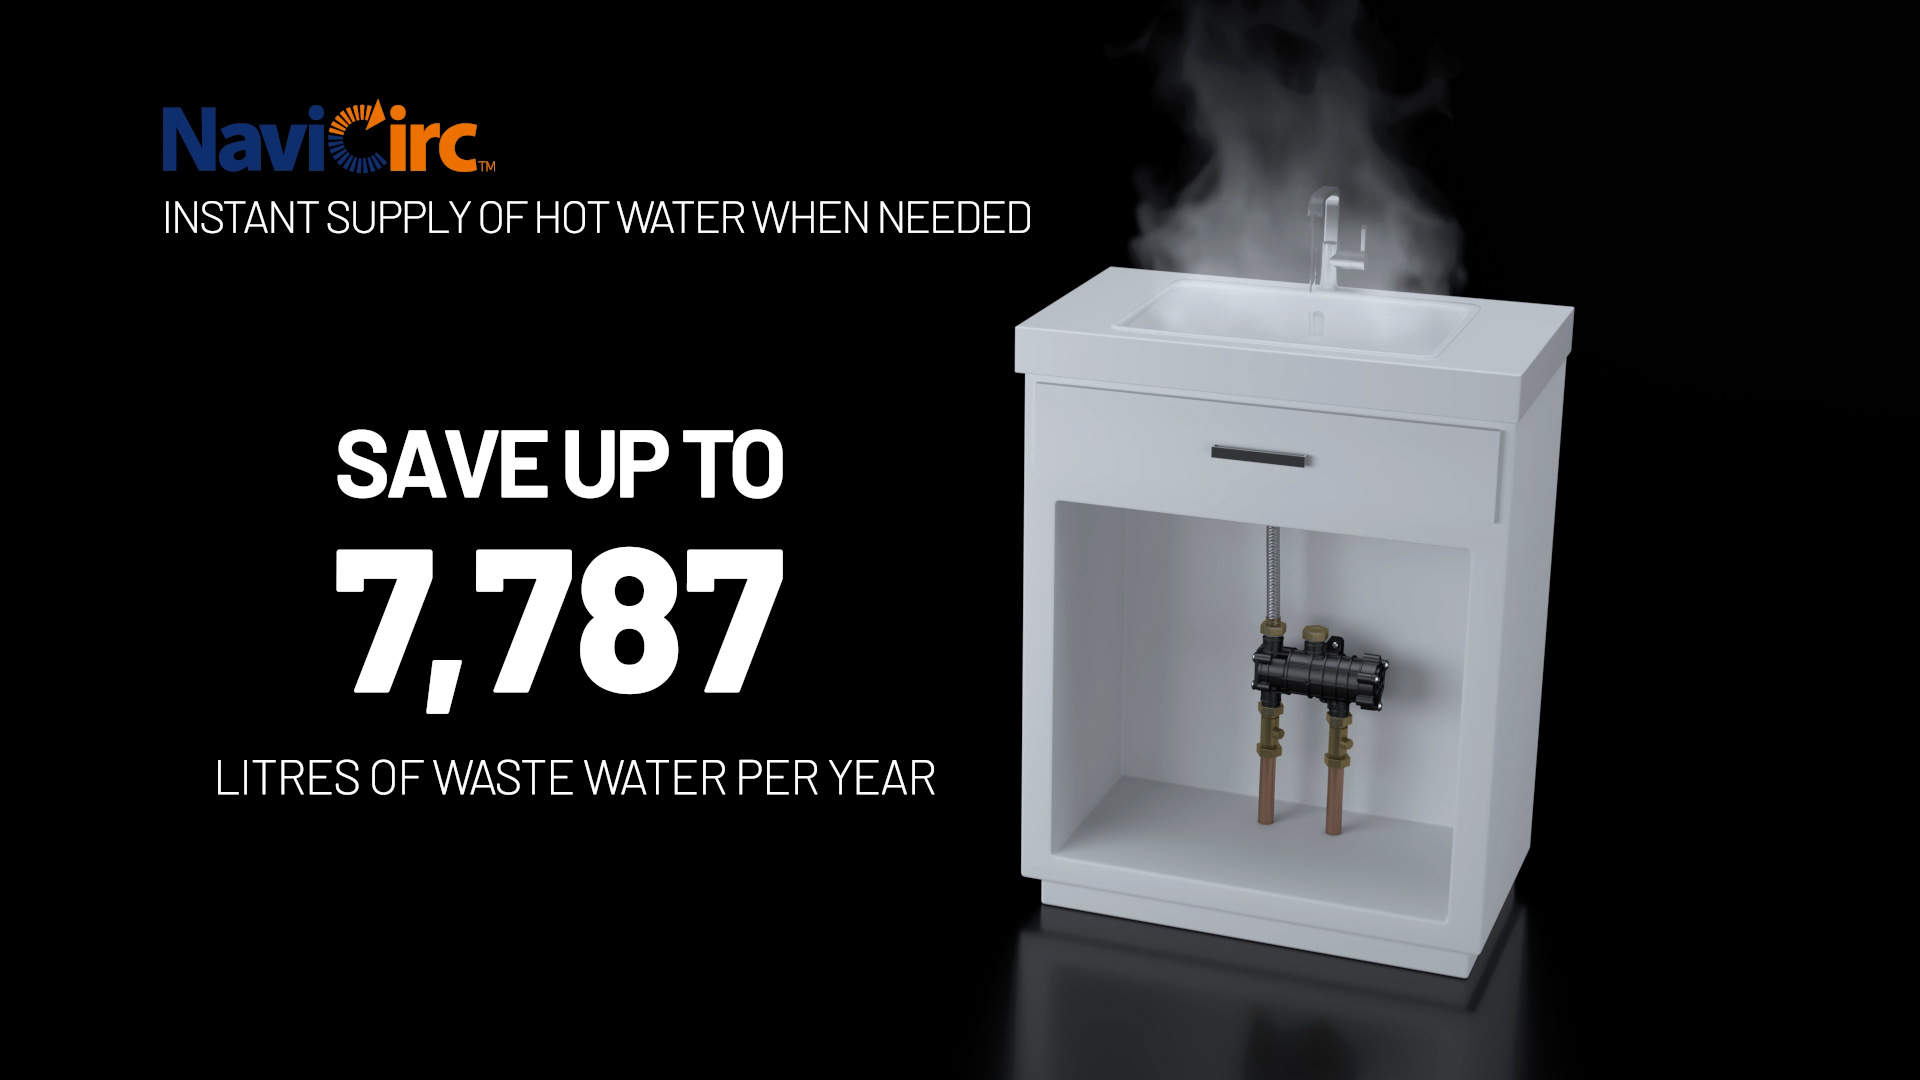 NaviCirc - save upto 7.787 litres of waste water per year